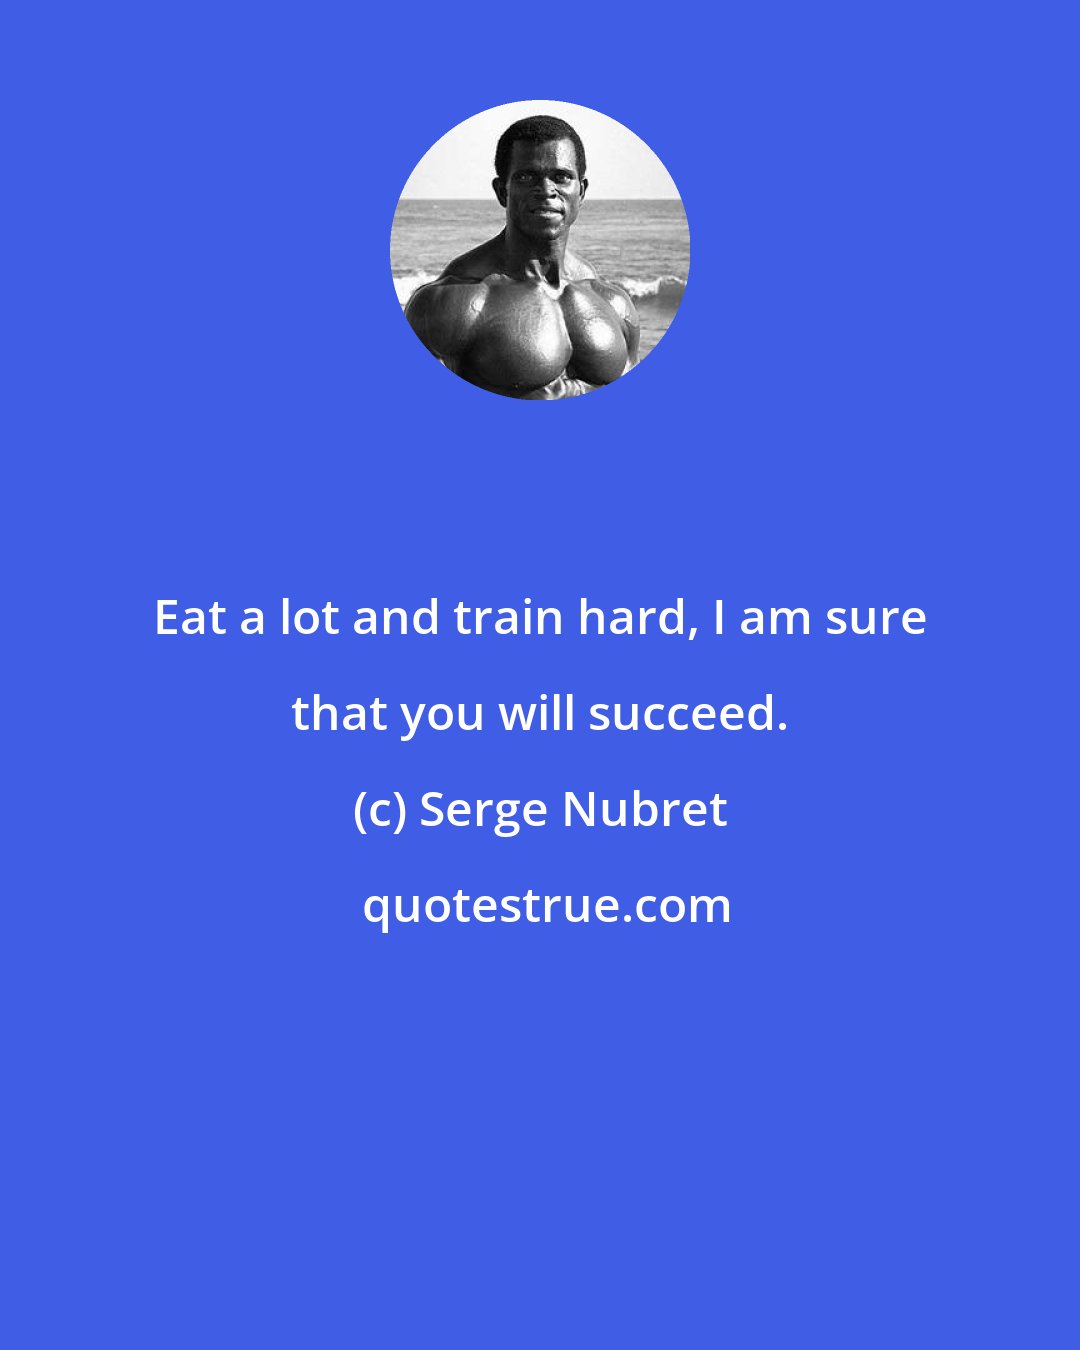 Serge Nubret: Eat a lot and train hard, I am sure that you will succeed.